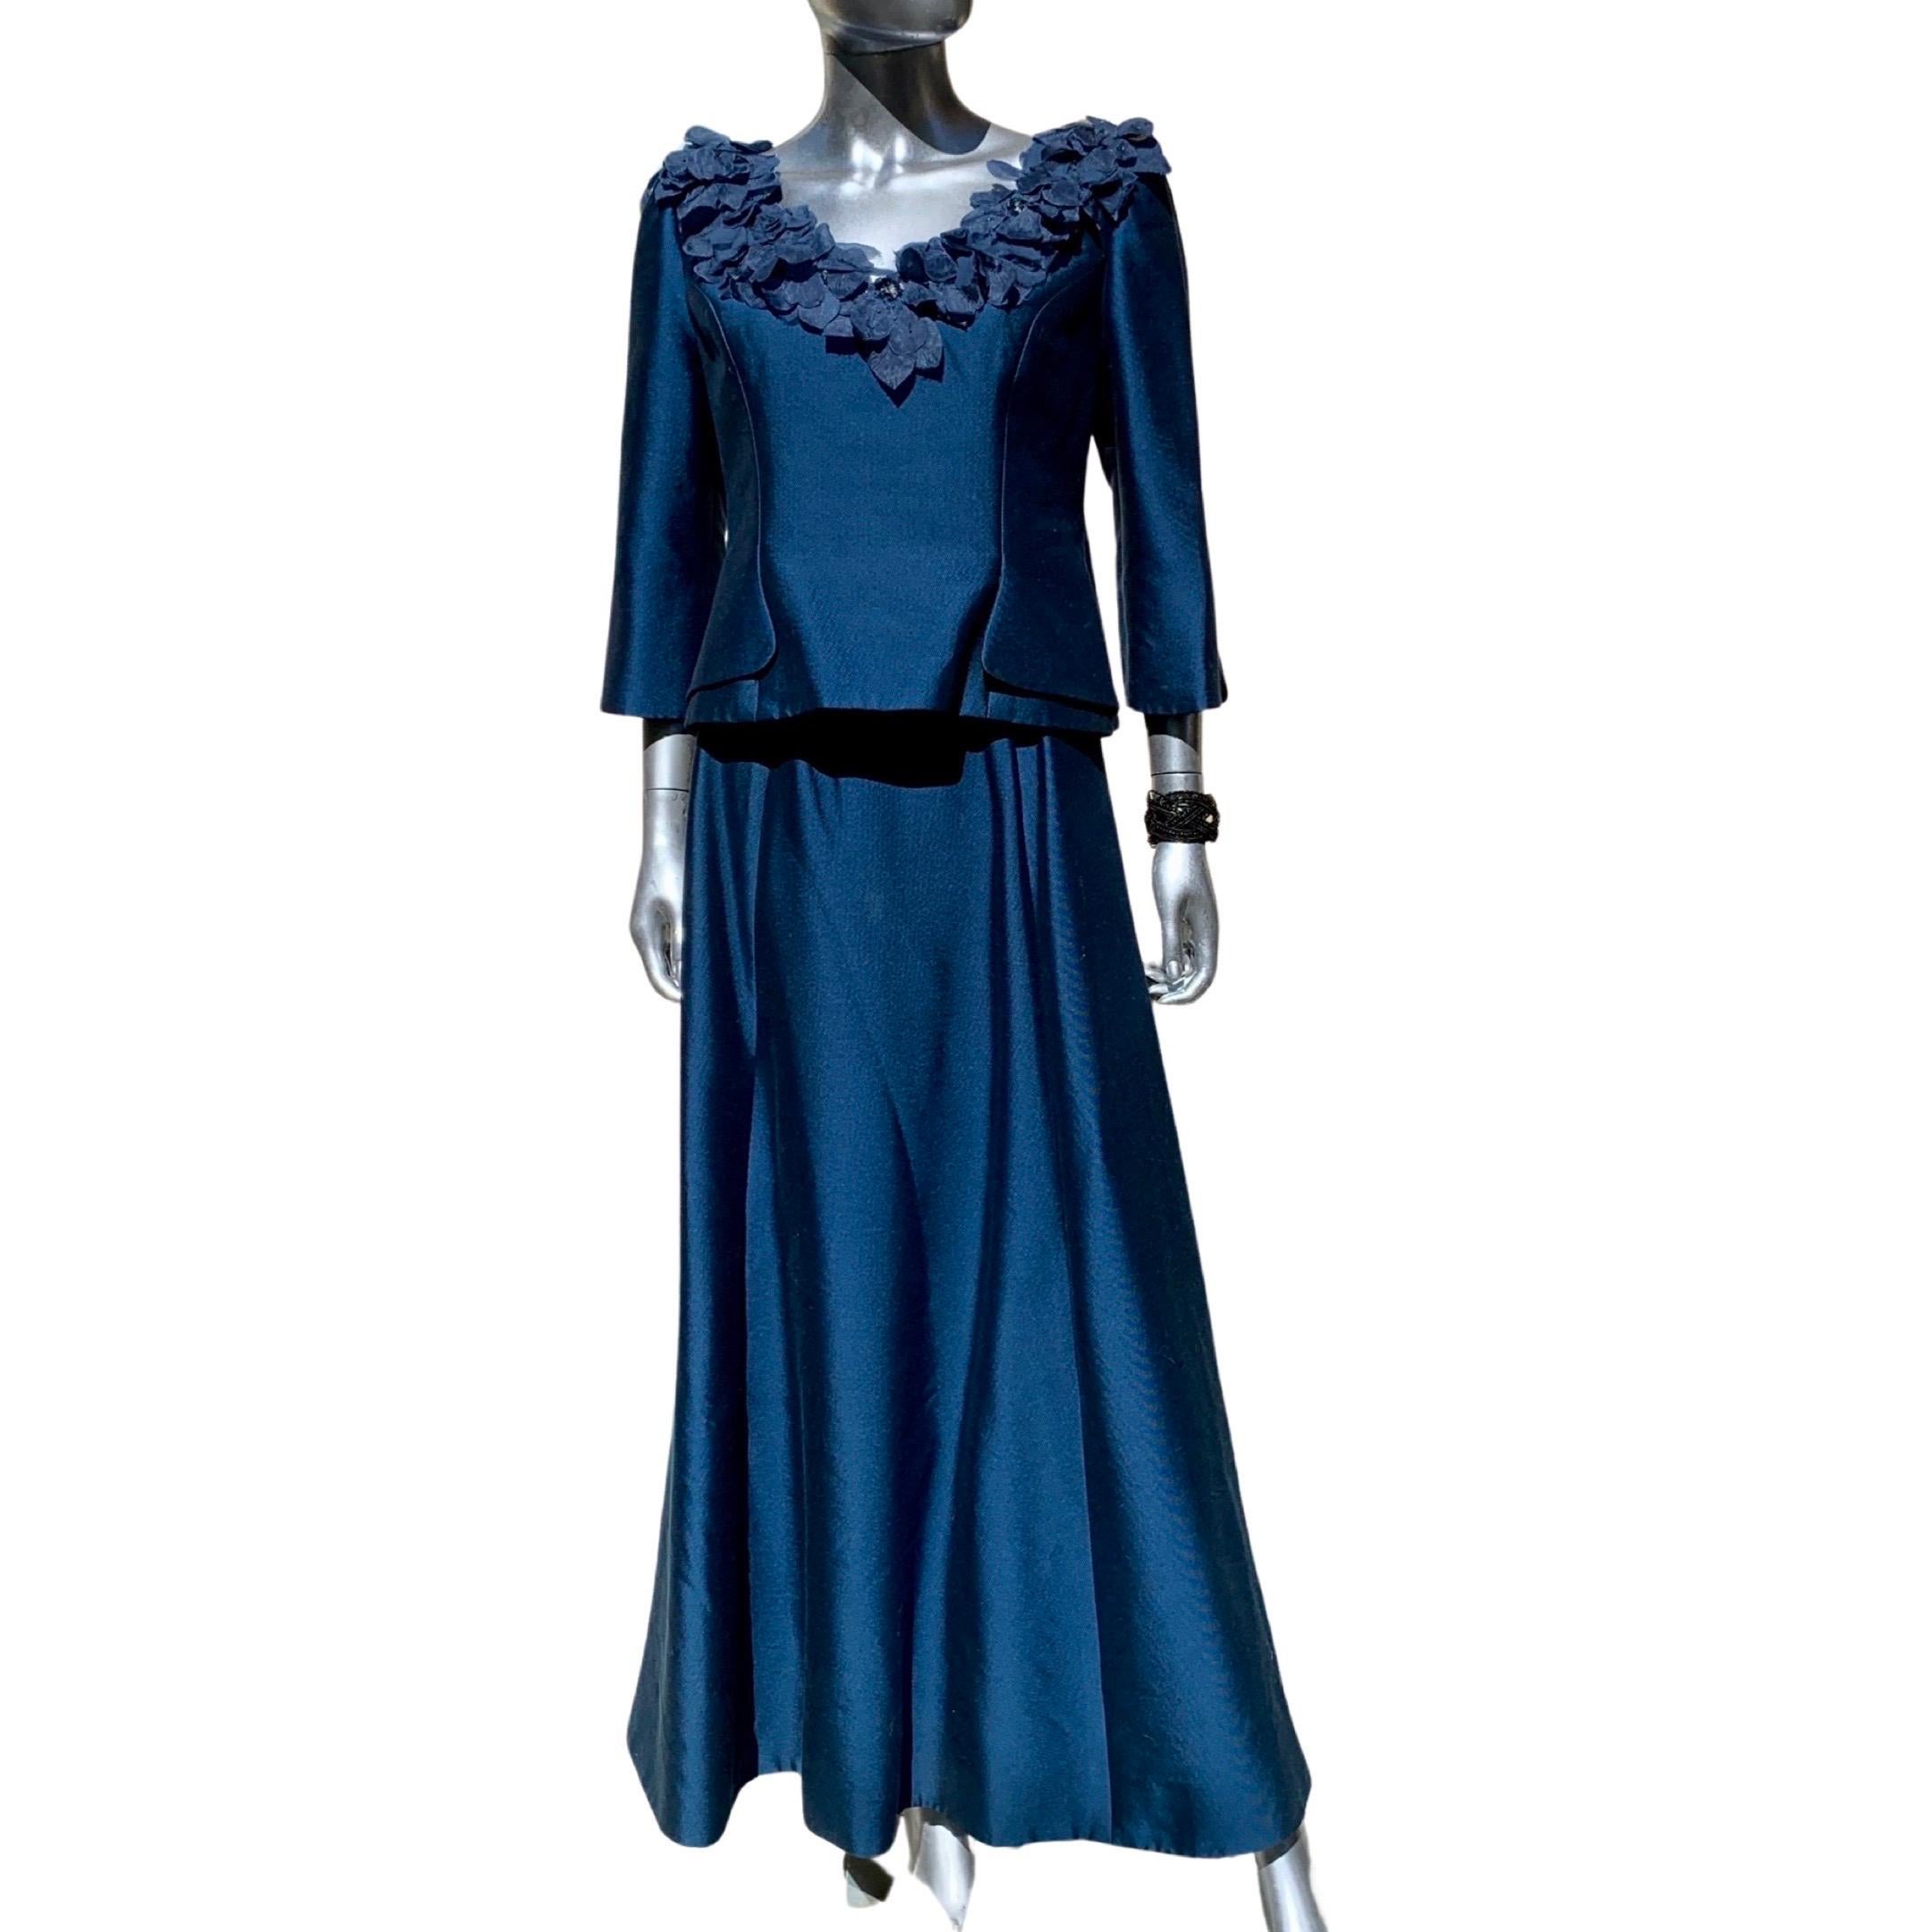 Three Piece Saphire Blue Couture Evening Ensemble by Lily Samii SF Size 8 For Sale 2